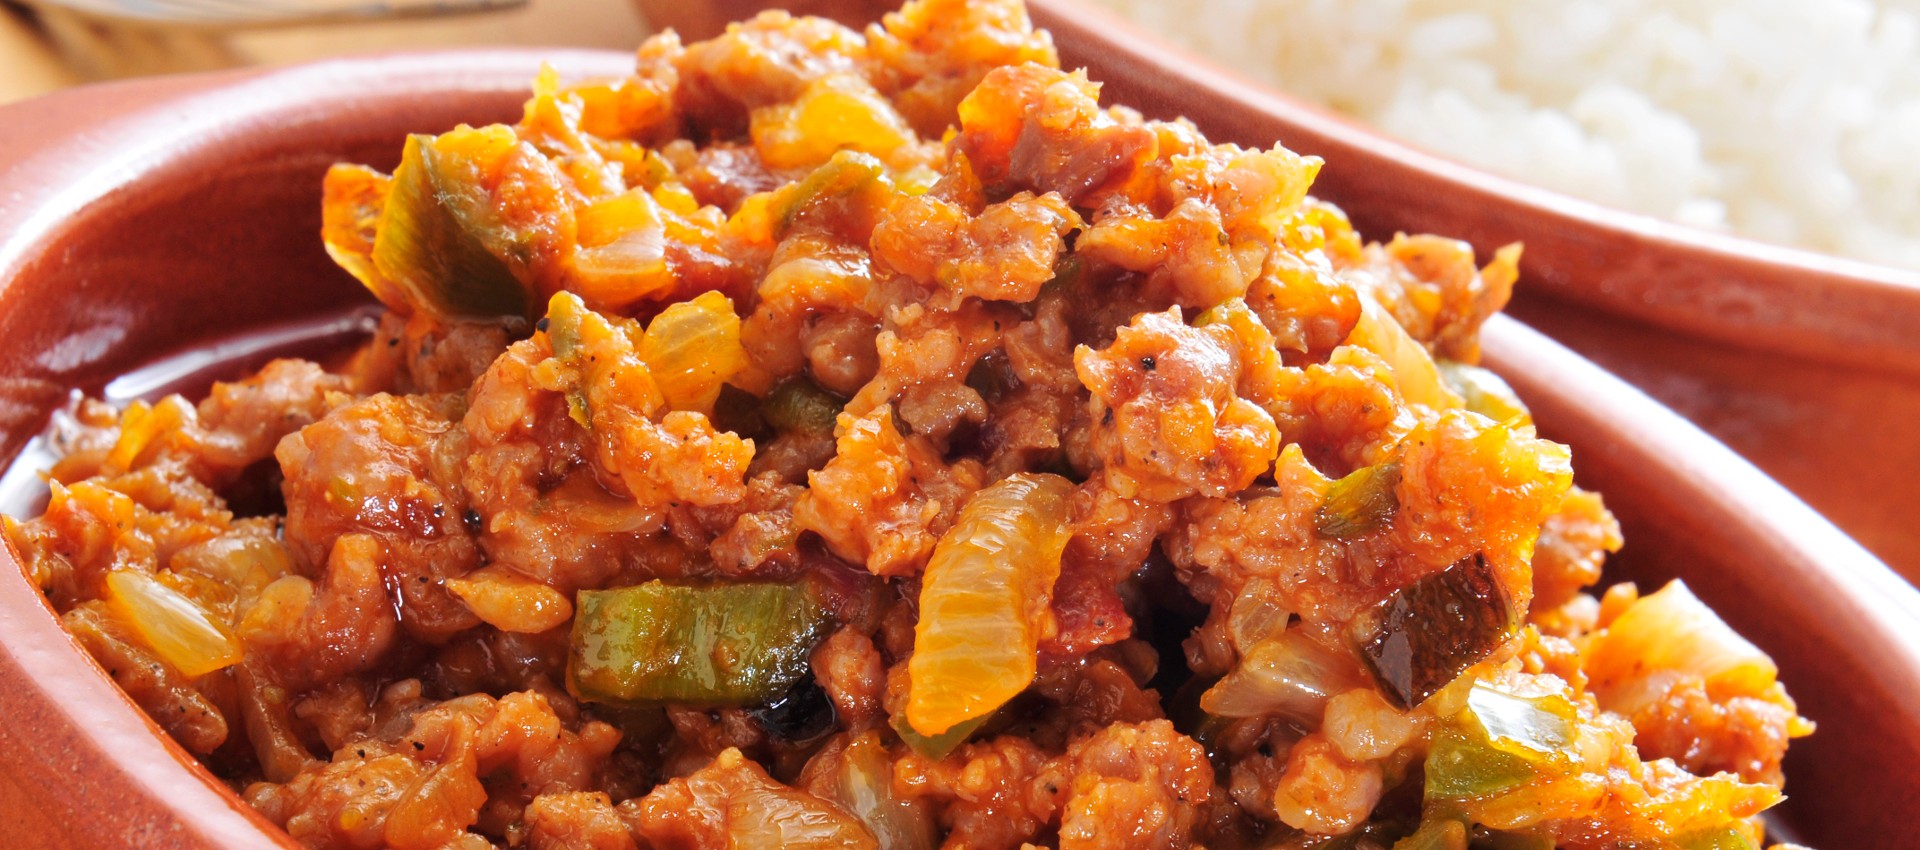 Mexican Recipes With Ground Beef Image